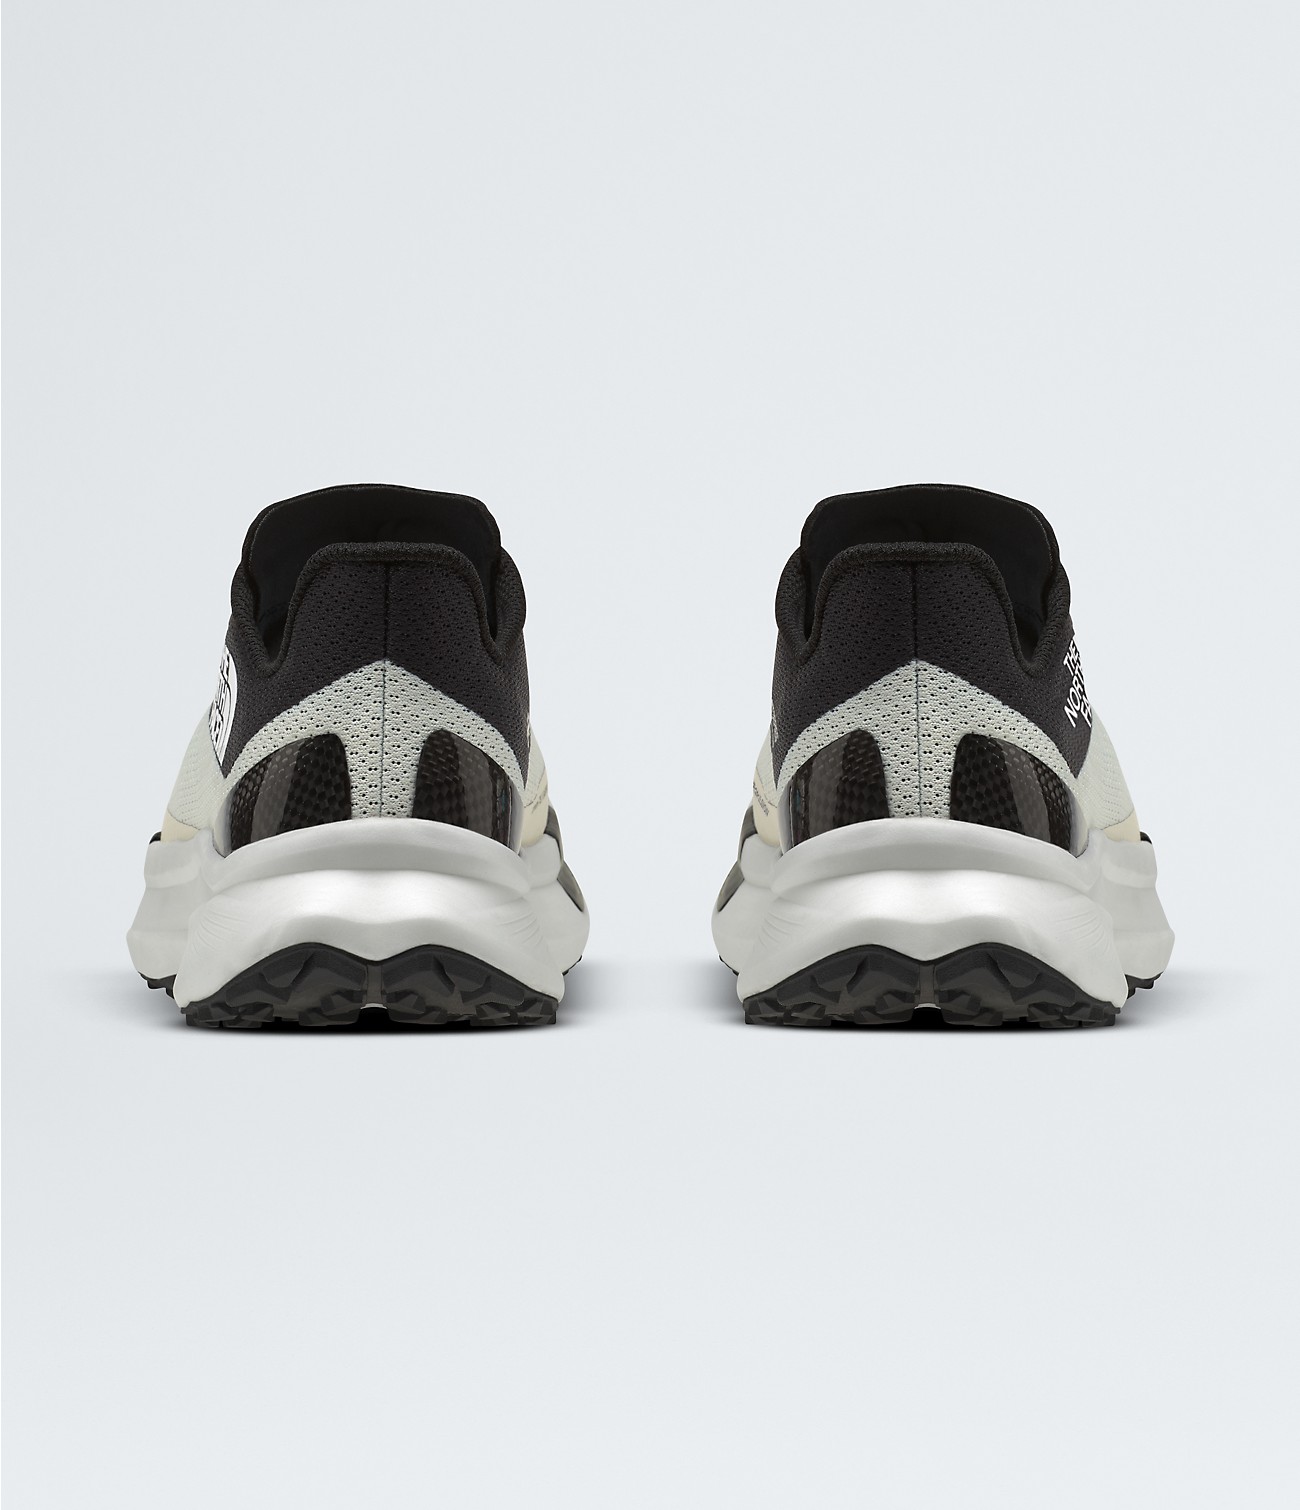 Men’s Summit Series VECTIV Pro 2 Shoes | The North Face